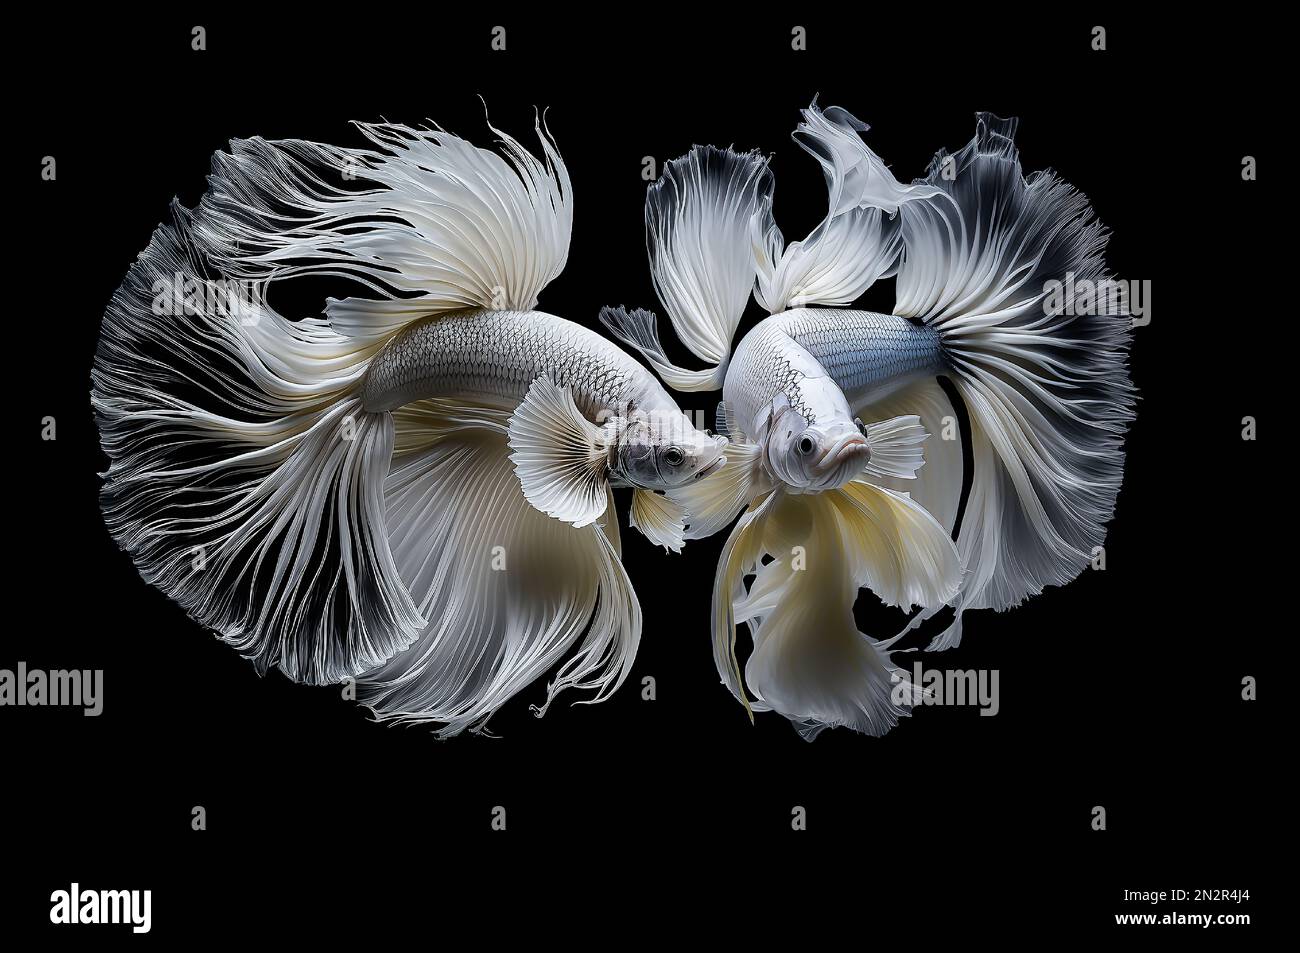 Close-up of two white Betta Fish against a black background Stock Photo